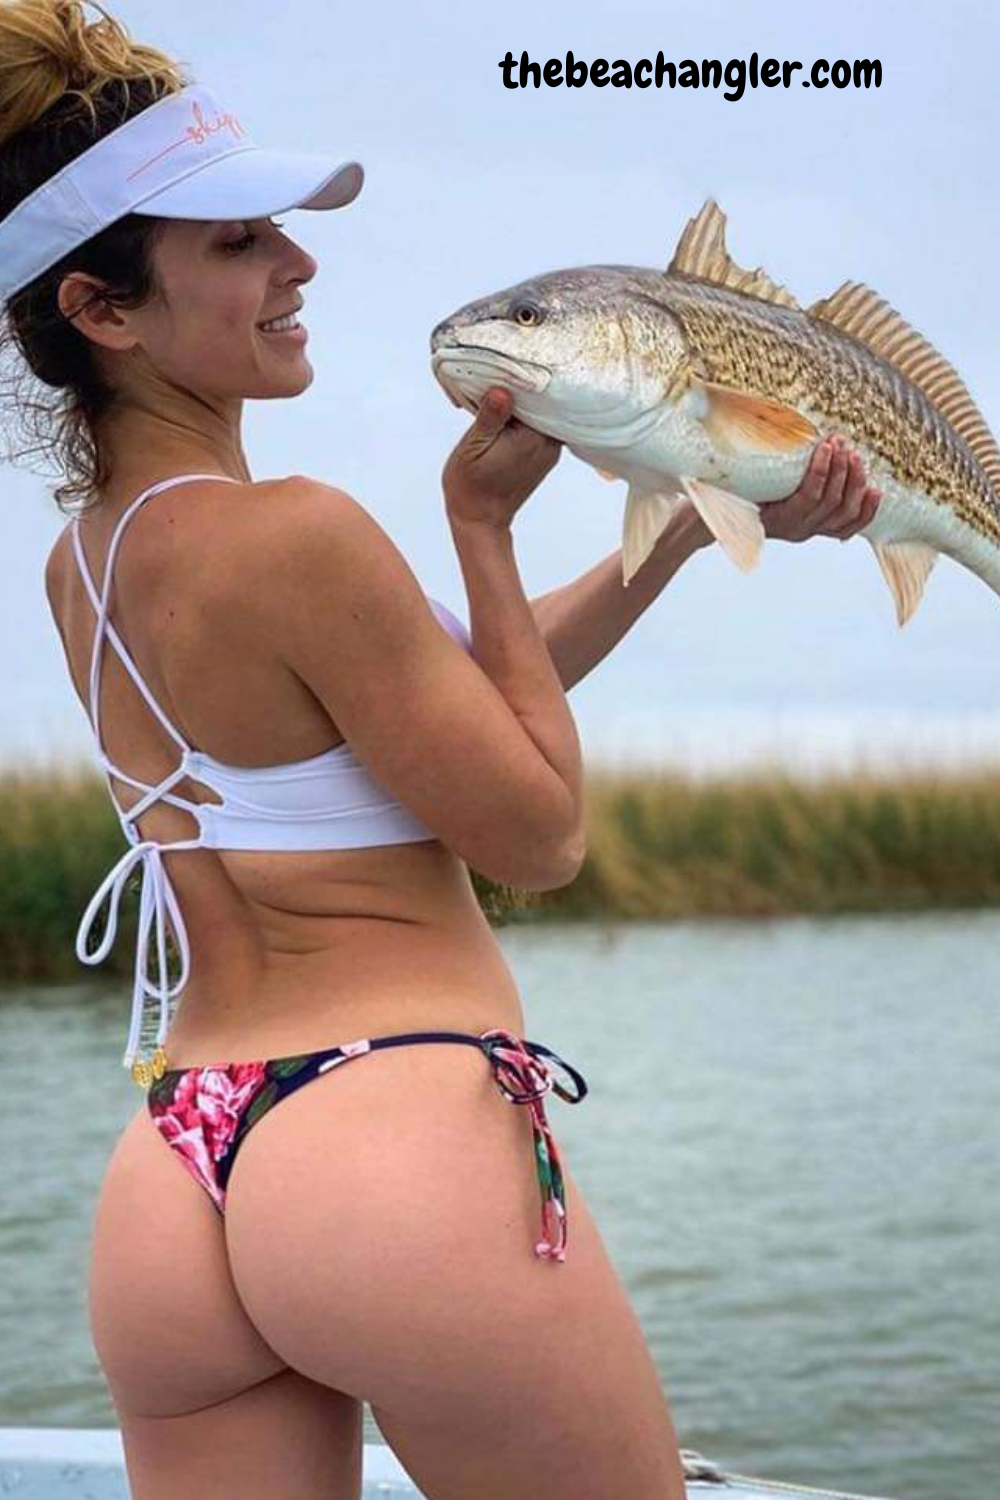 Young lady with a nice upper slot redfish caught with an Okuma rod.